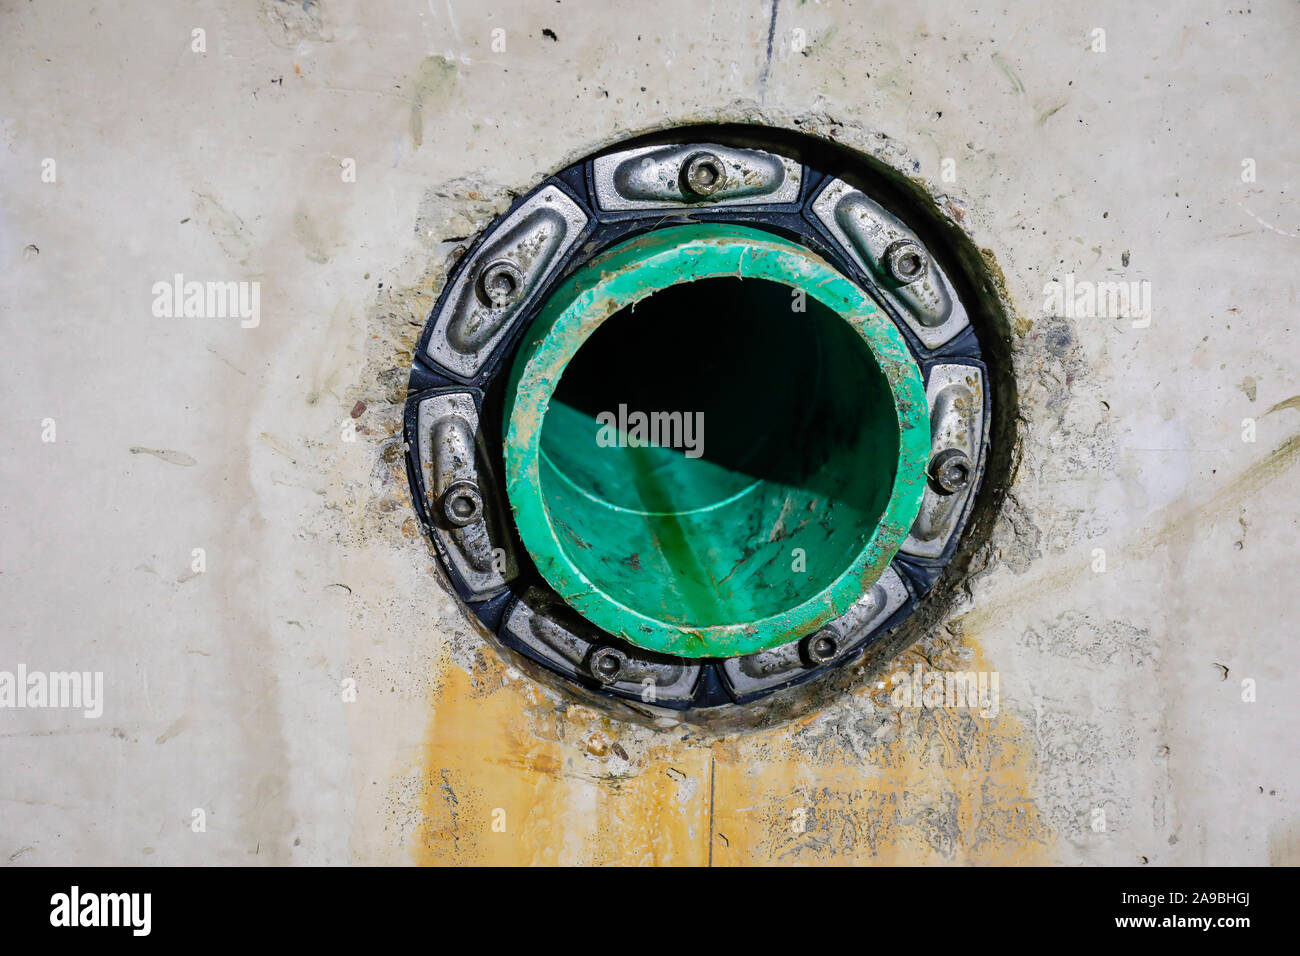 06.06.2019, Essen, North Rhine-Westphalia, Germany - Freshly drilled house connection from a newly laid sewer pipe. 00X190606D019CAROEX.JPG [MODEL REL Stock Photo